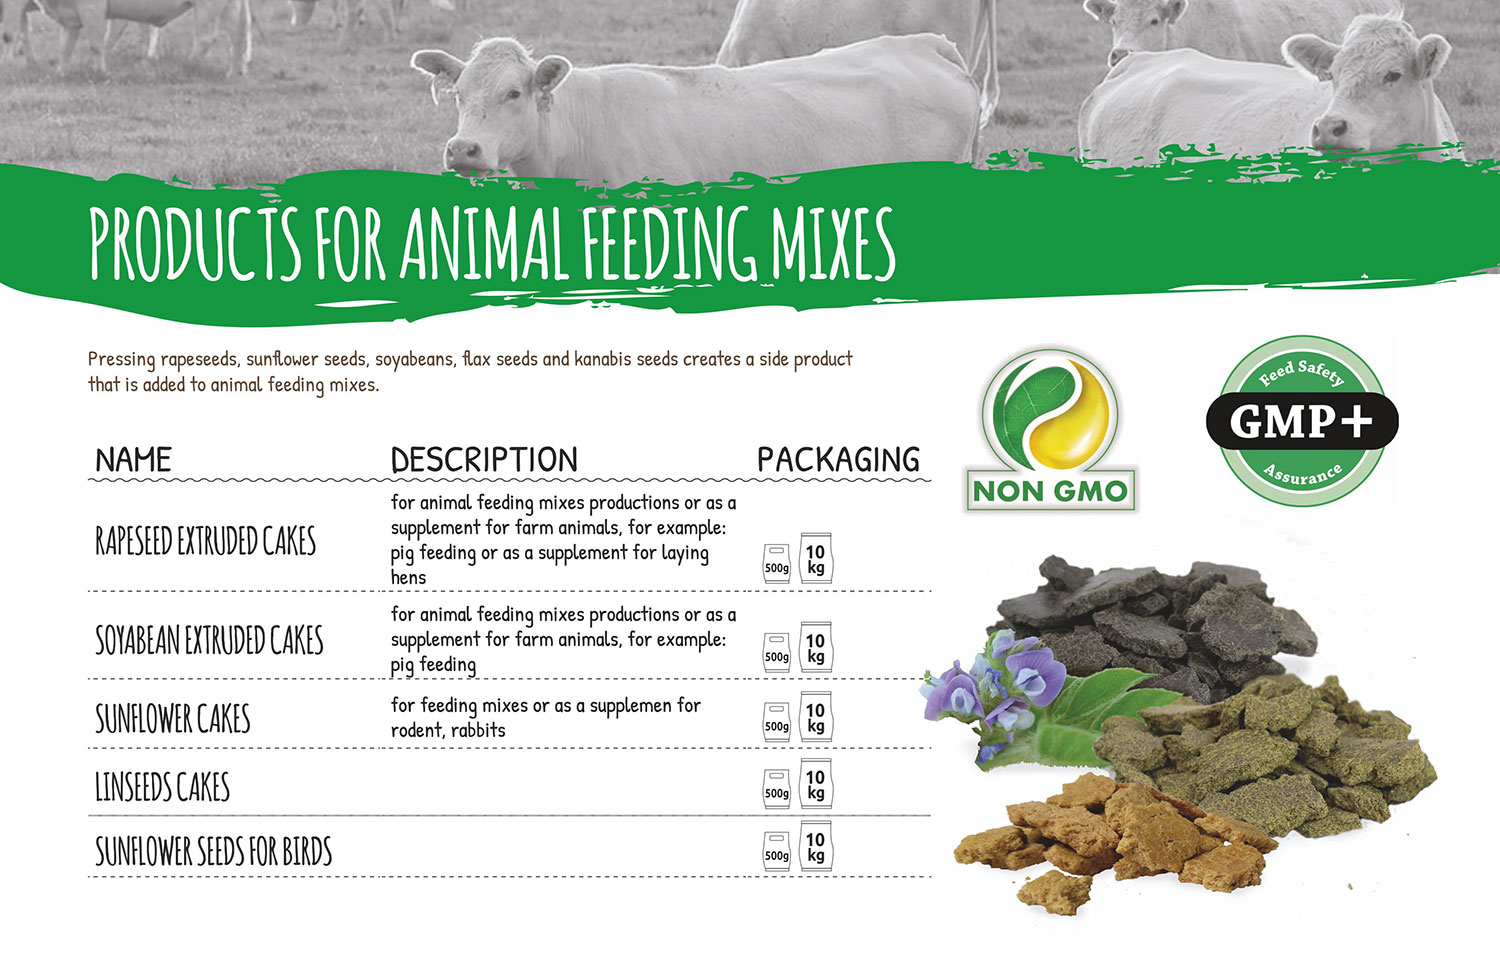 Products for animal feeding mixes